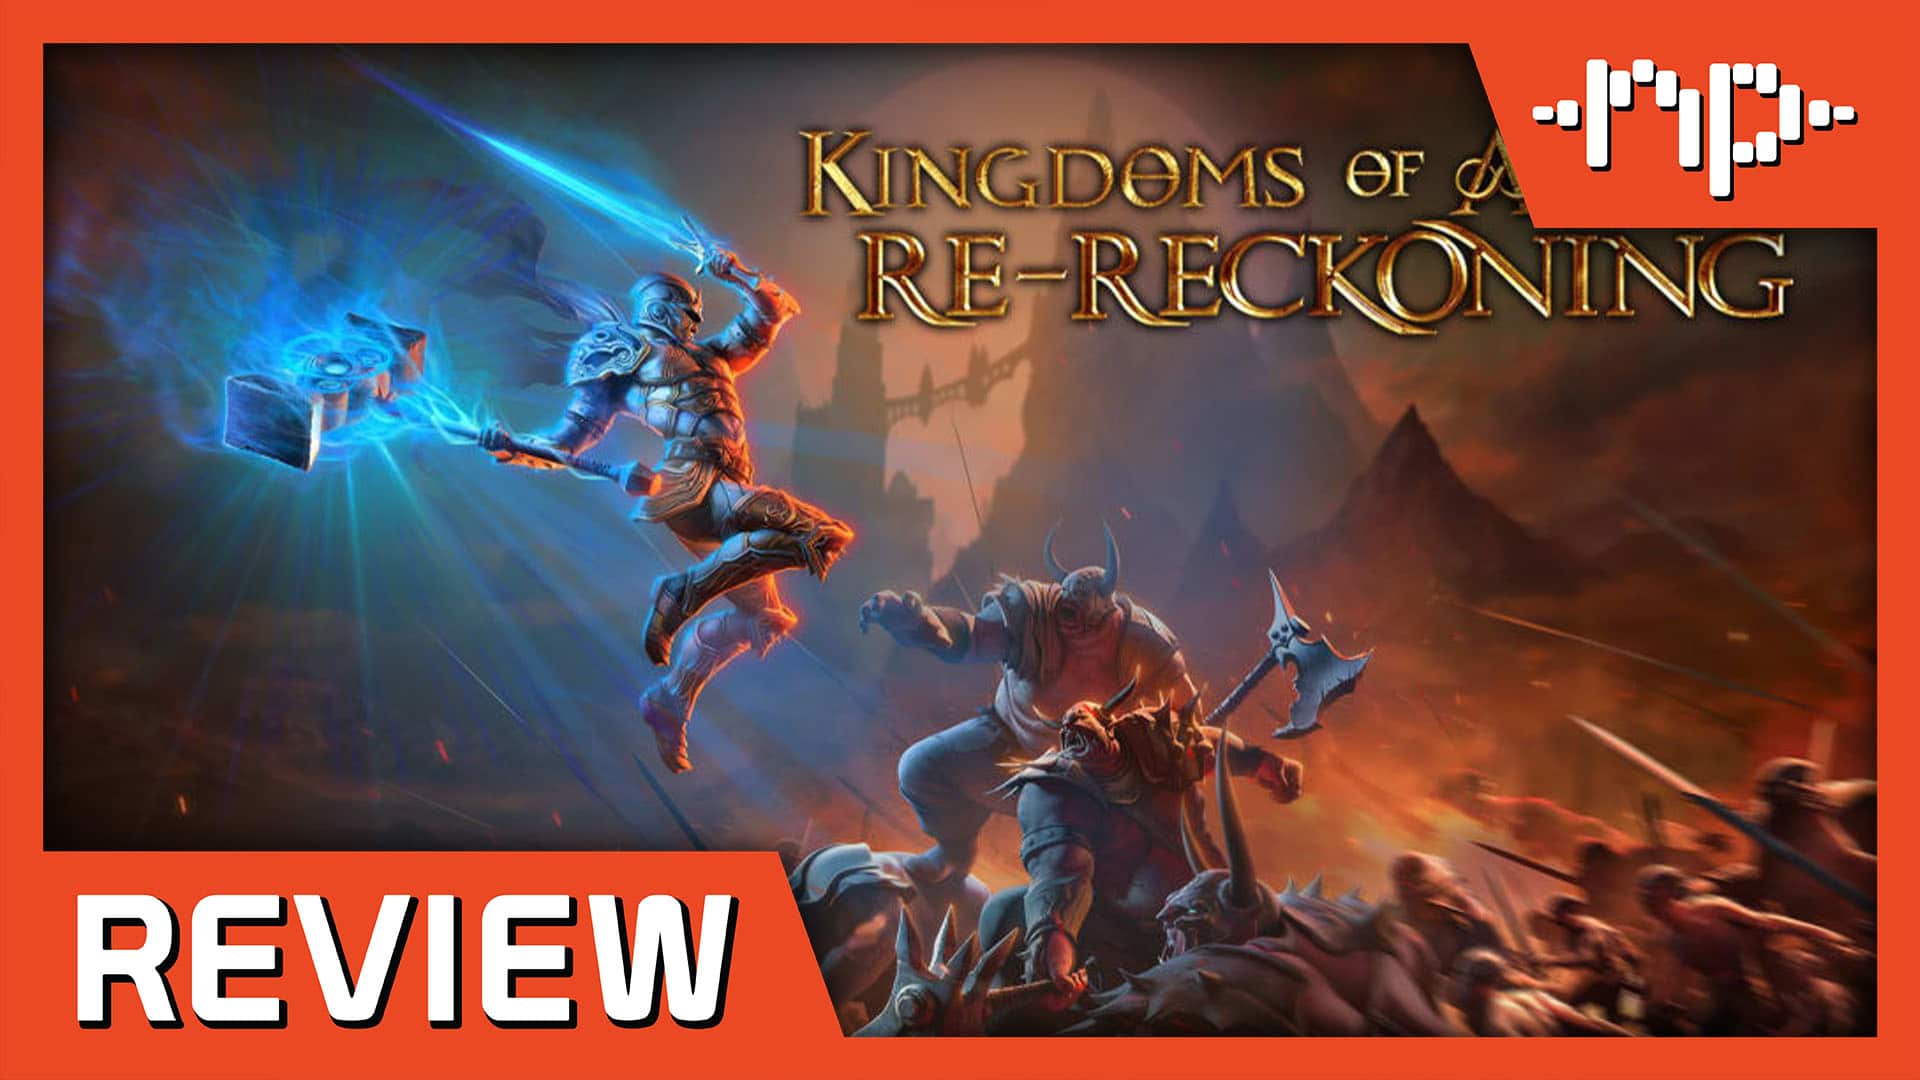 Kingdoms of Amalur: Re-Reckoning Review – Blast from the Past